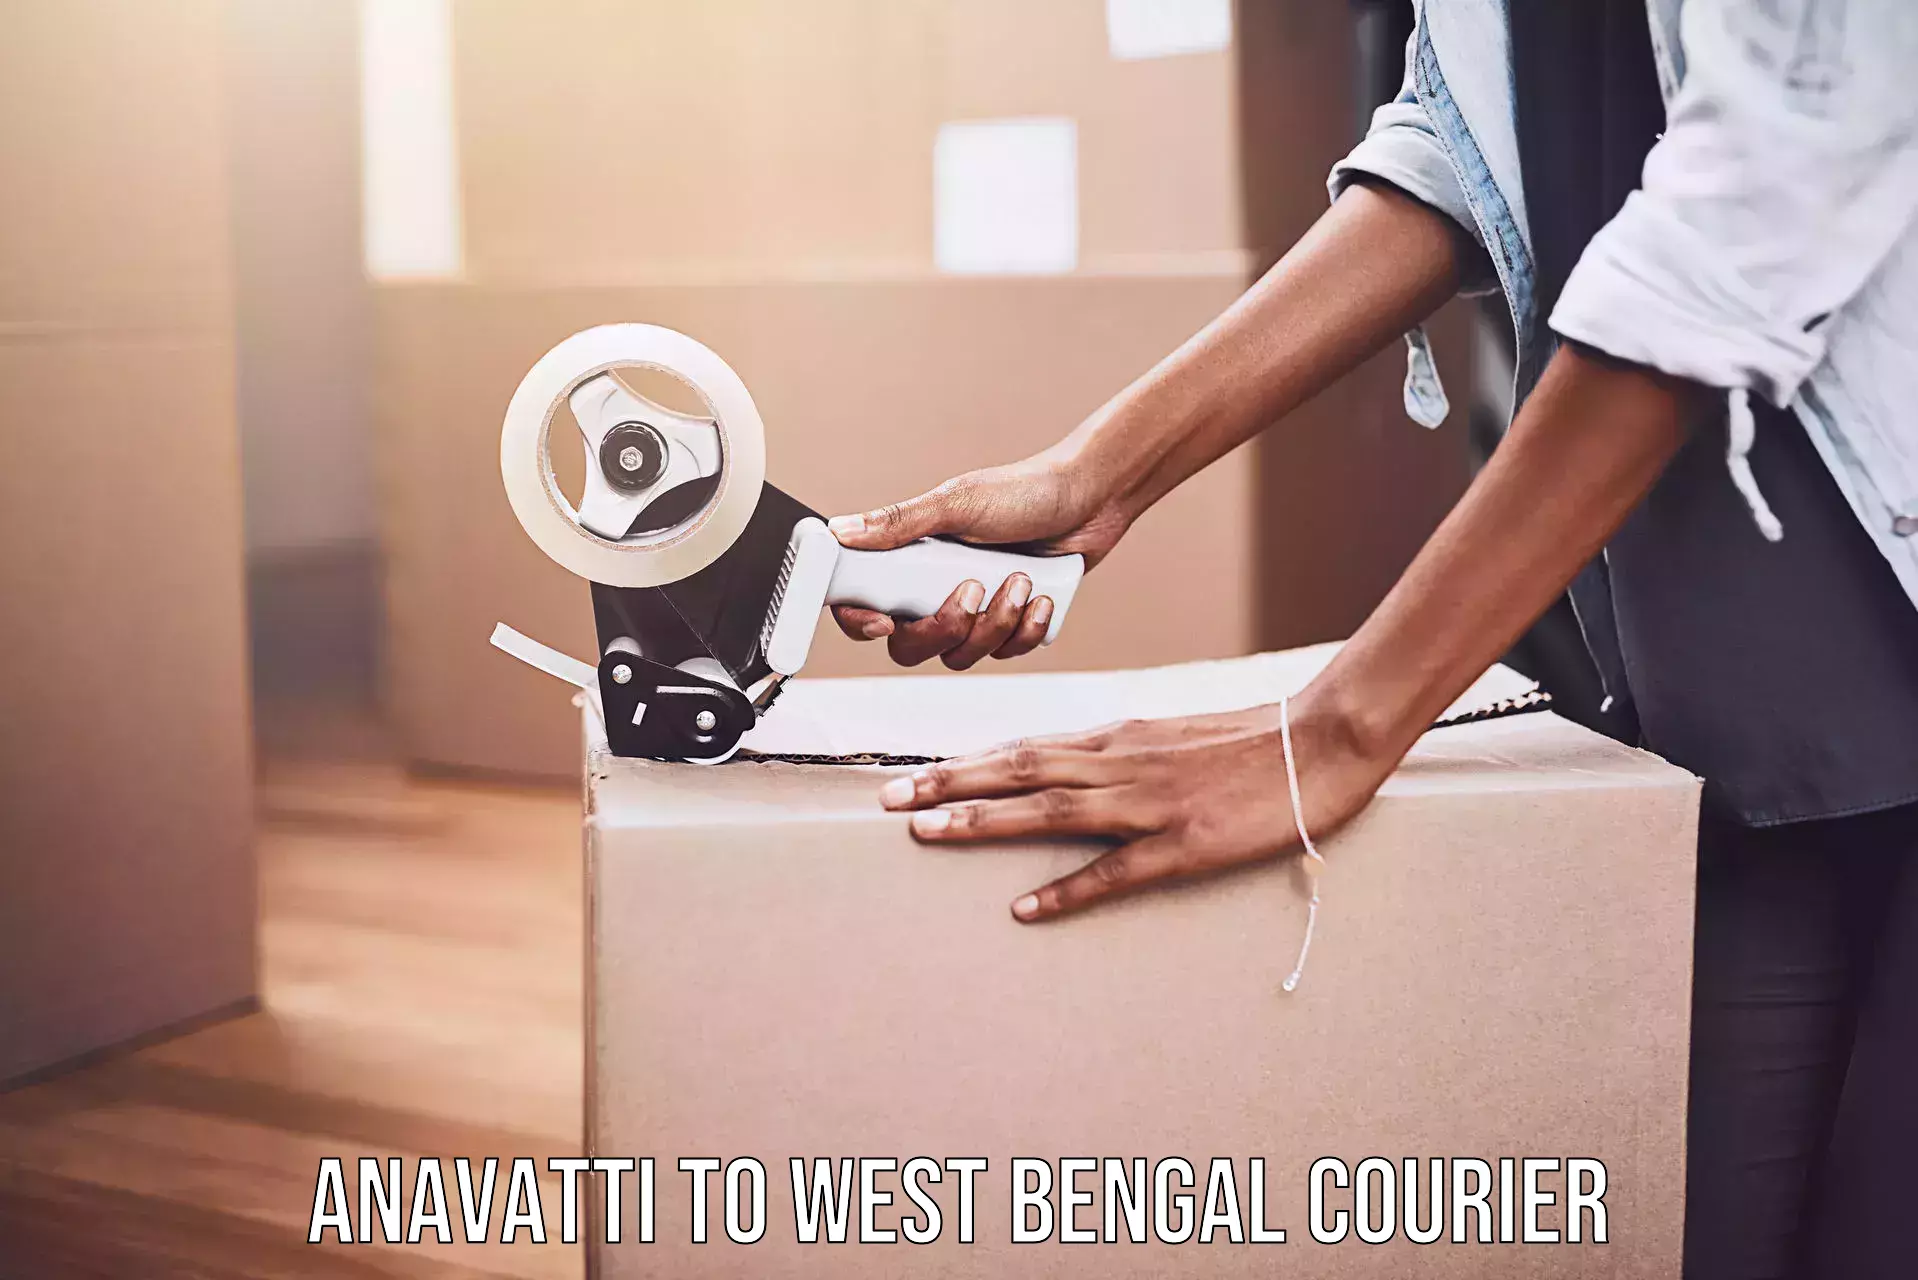 Nationwide shipping services Anavatti to West Bengal